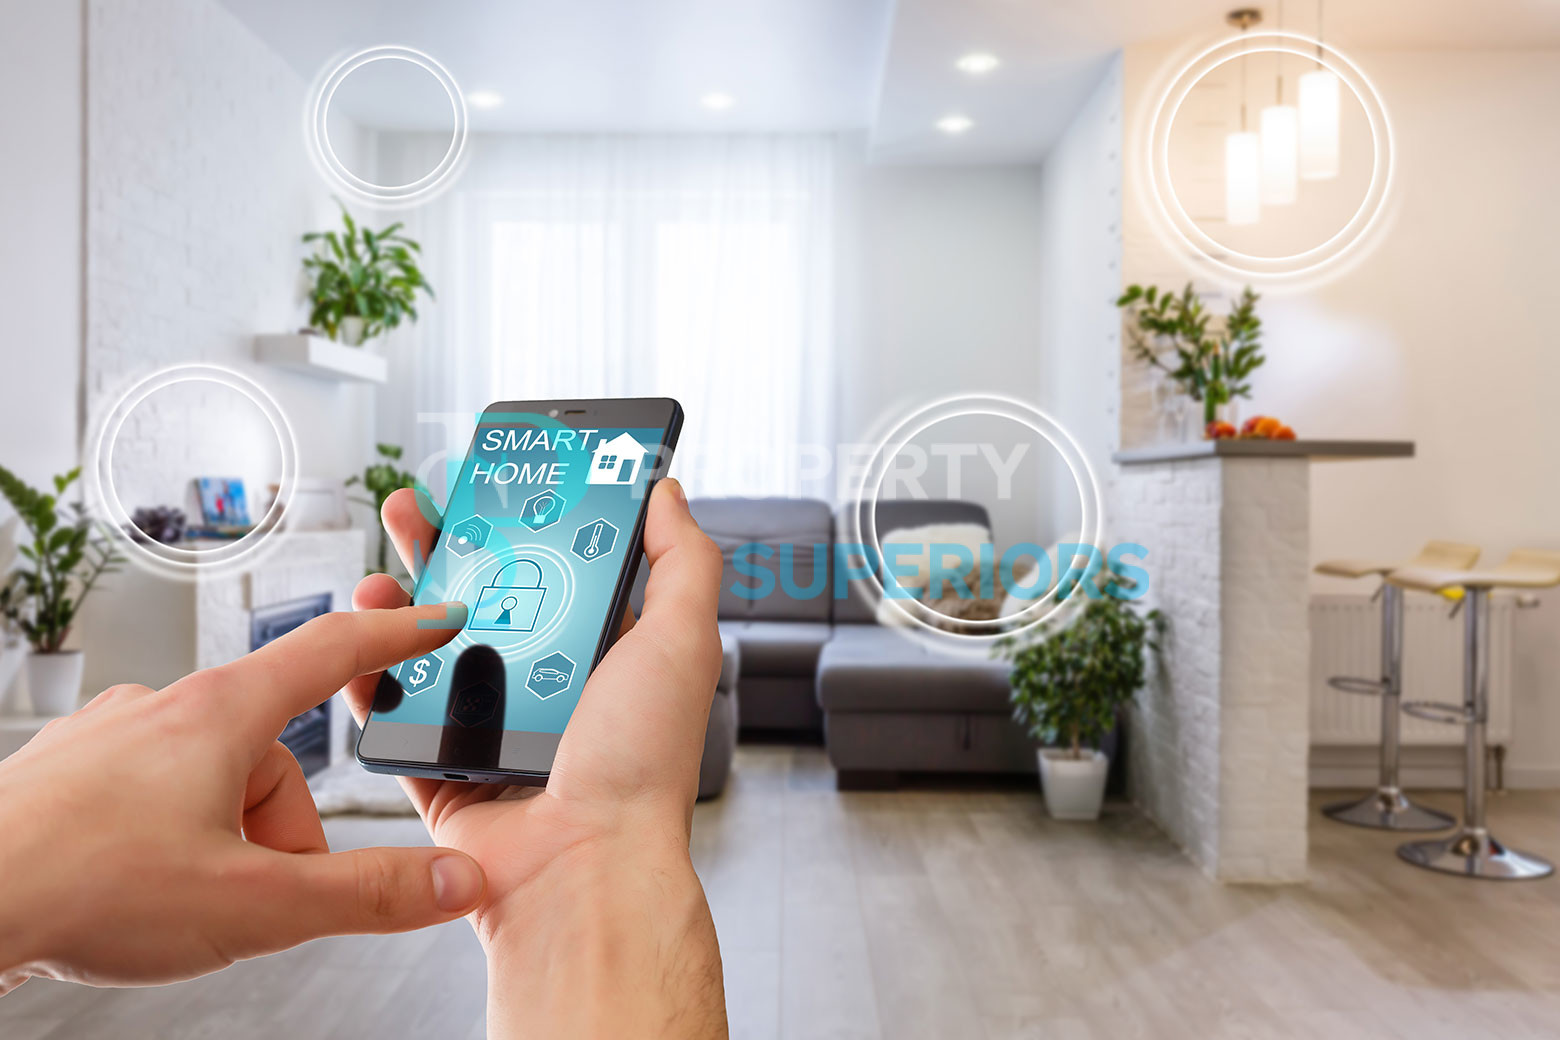  What Are Smart Home Systems? How Does It Work?